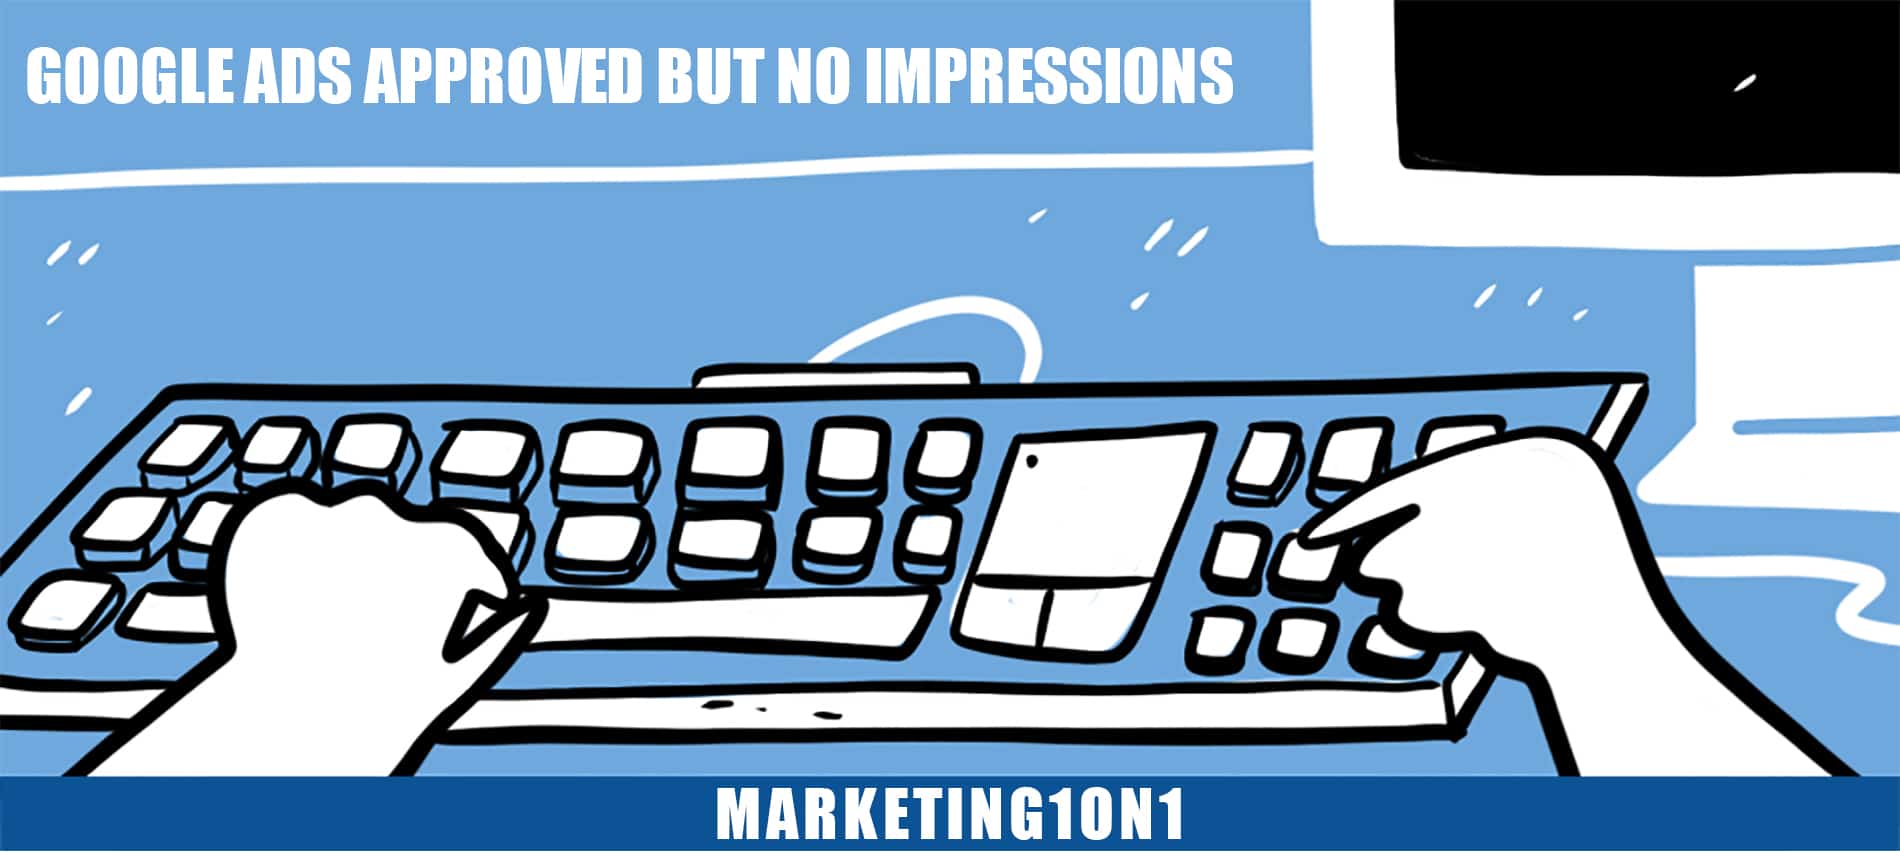 Google ads approved but no impressions? Learn how to fix it.